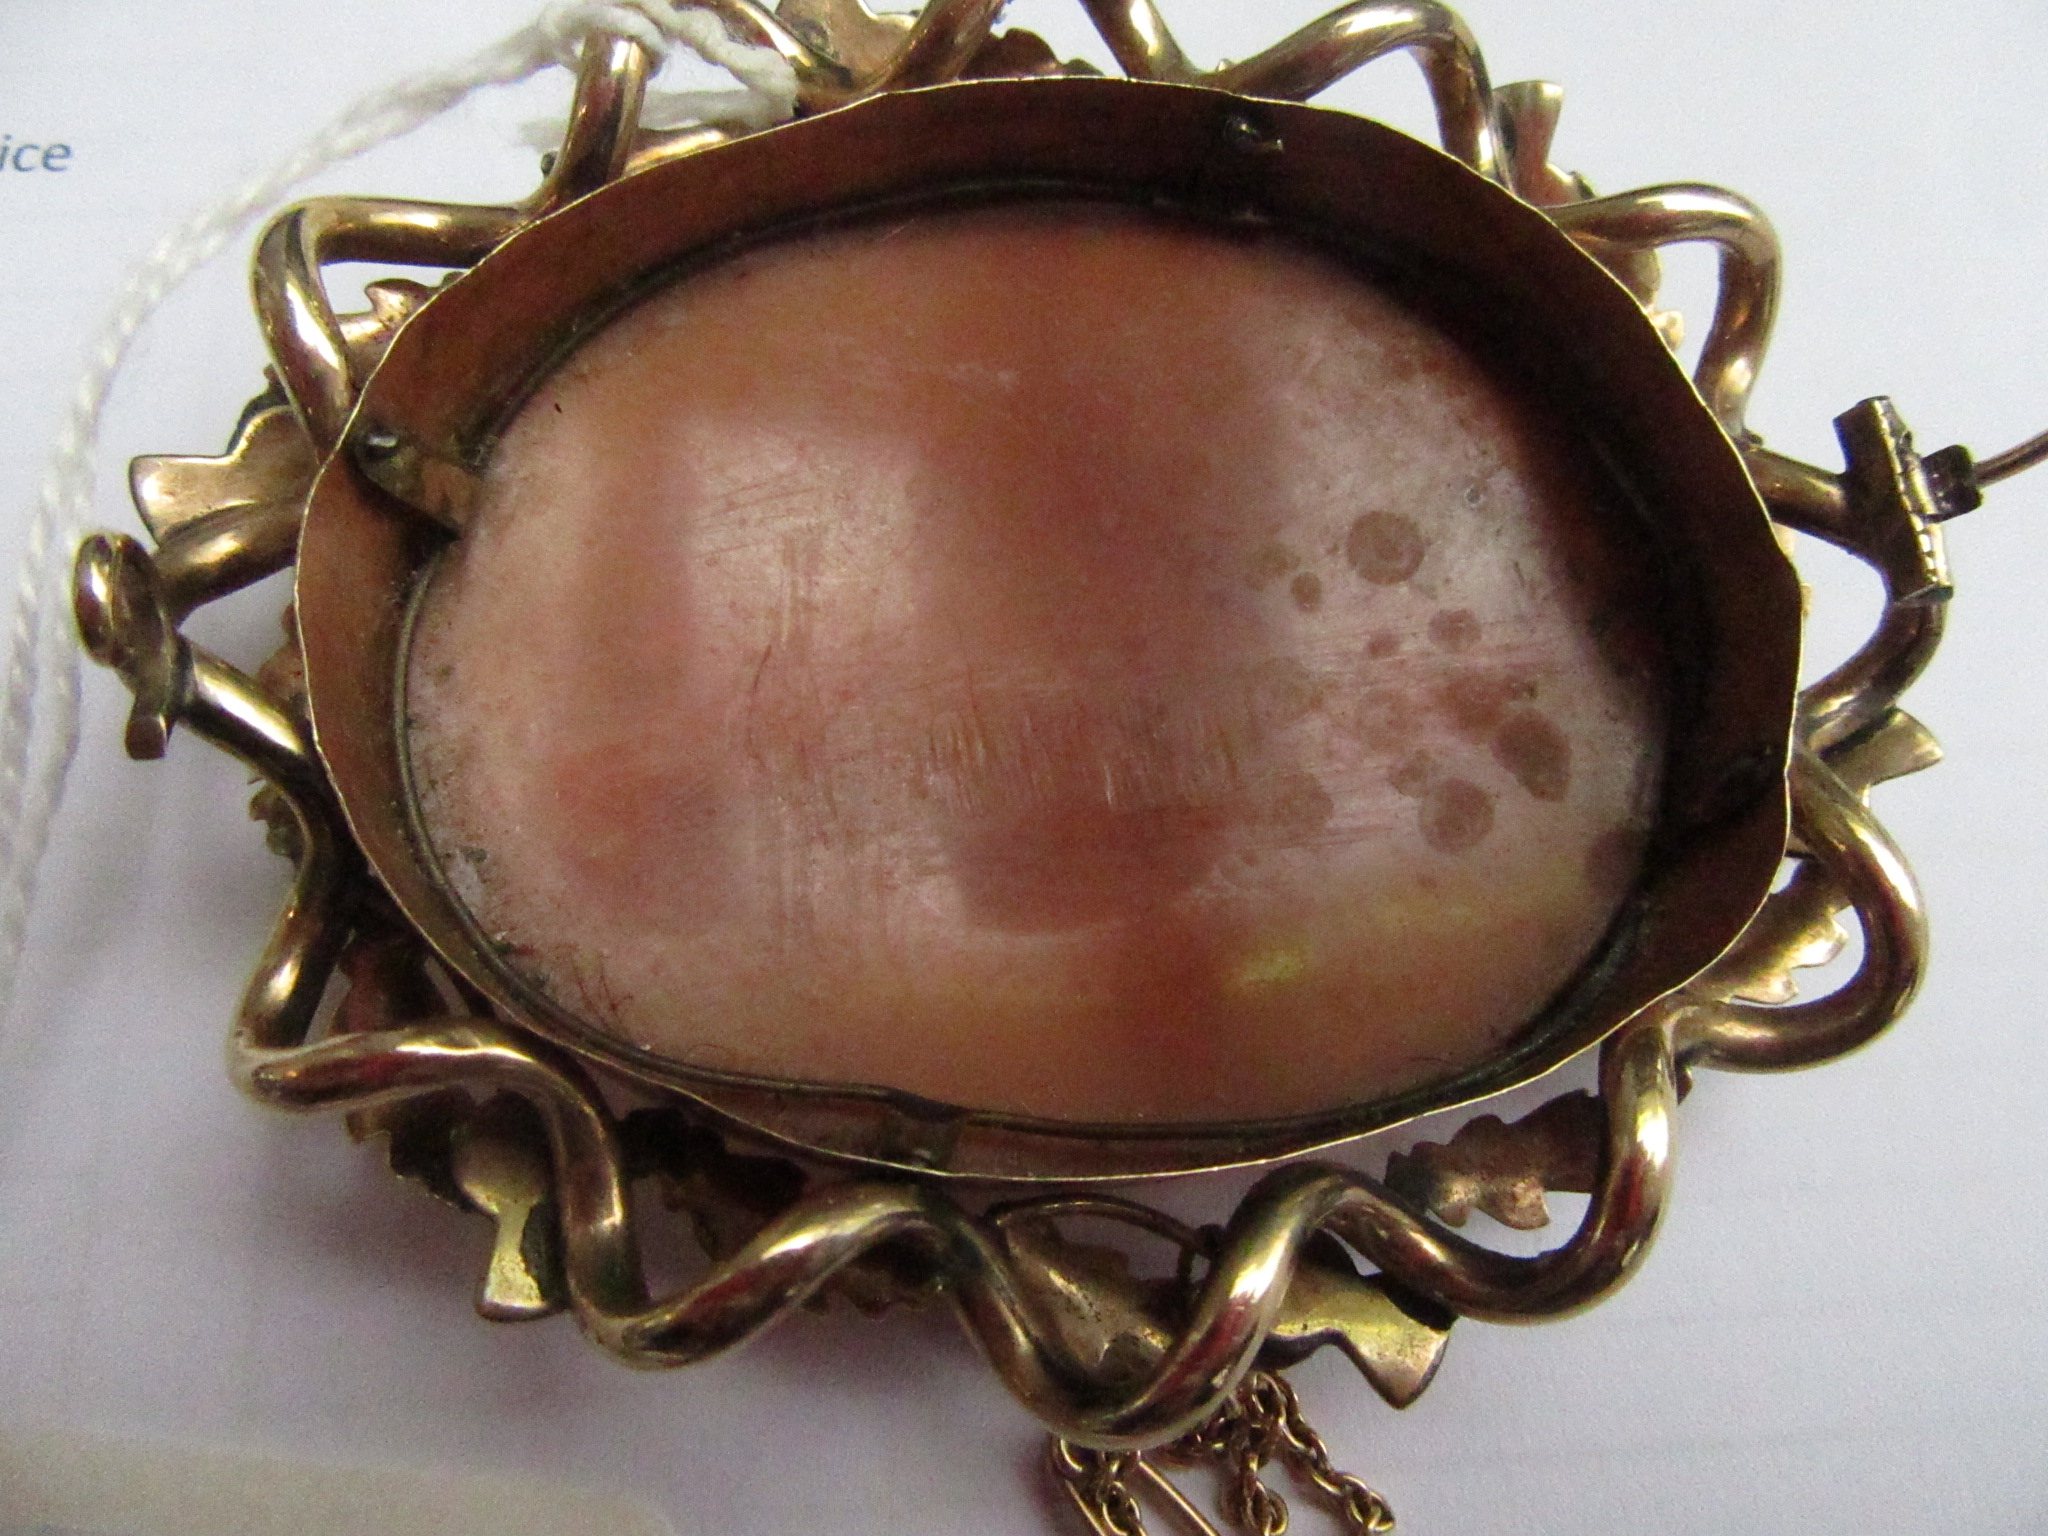 A 19th century large oval cameo brooch showing wild horses and mythical figures in a gold thistle - Image 2 of 2